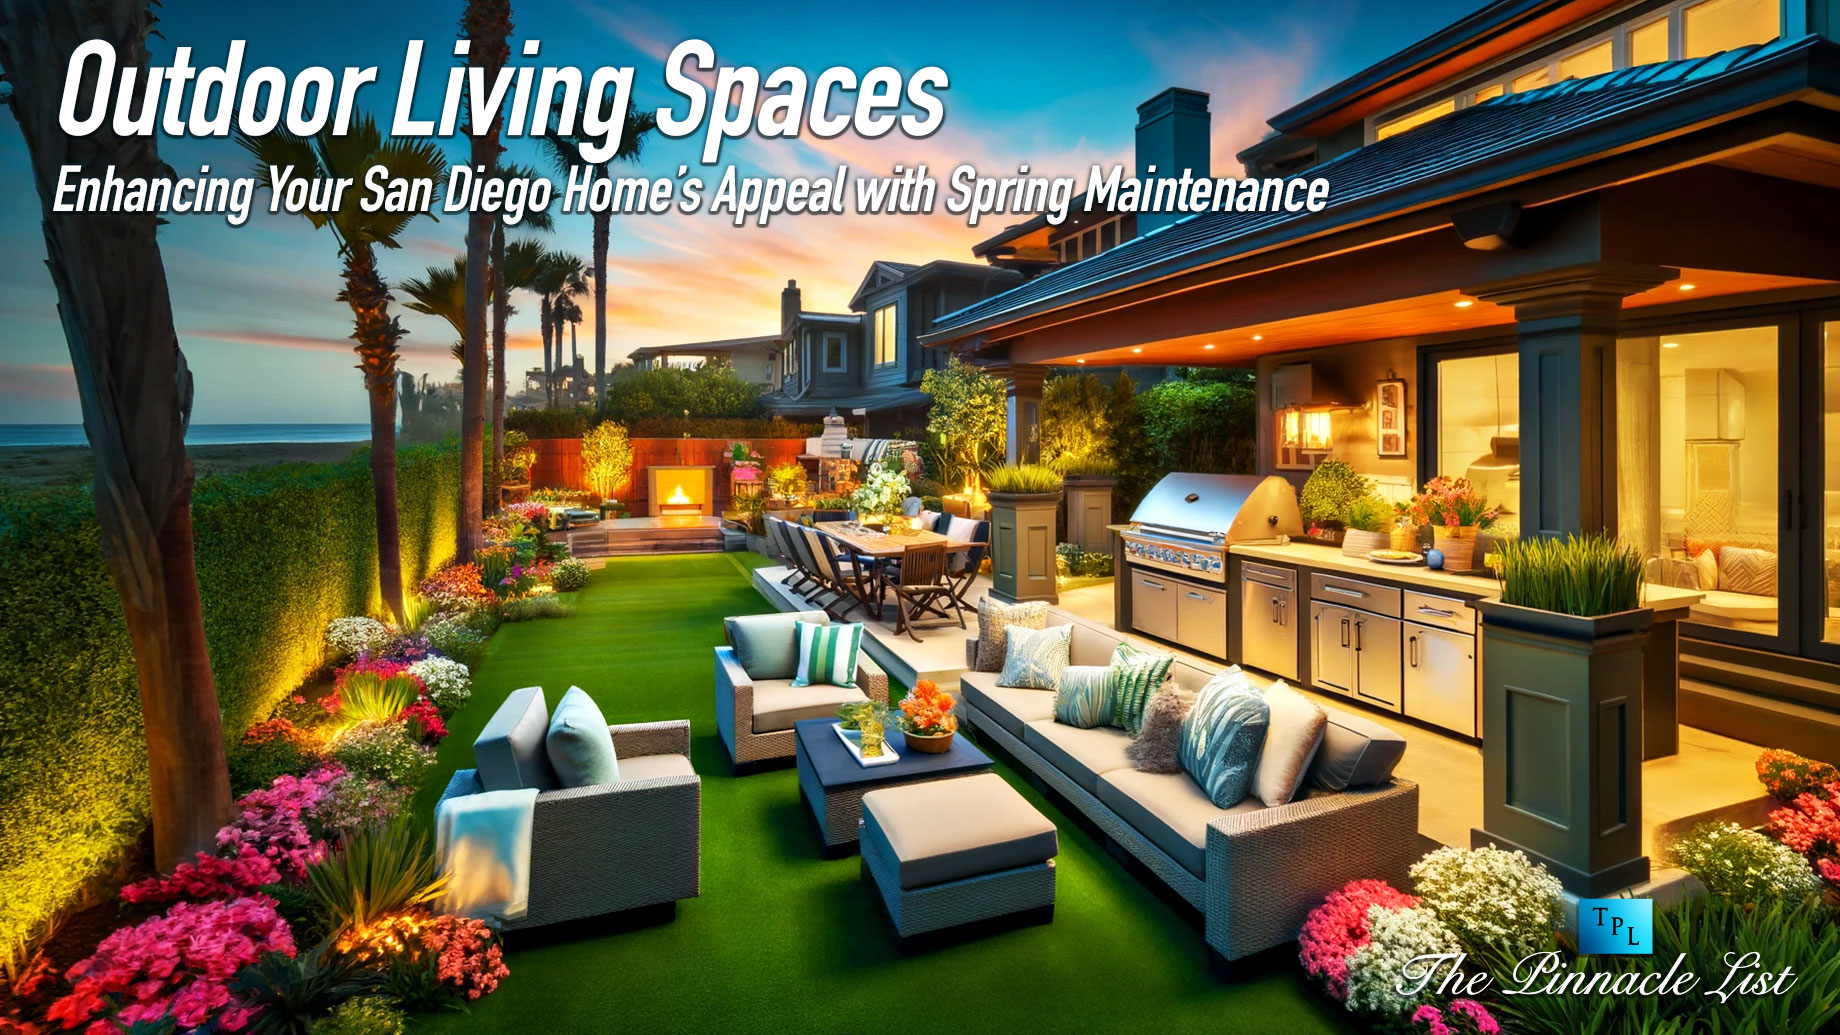 Outdoor Living Spaces: Enhancing Your San Diego Home’s Appeal with Spring Maintenance